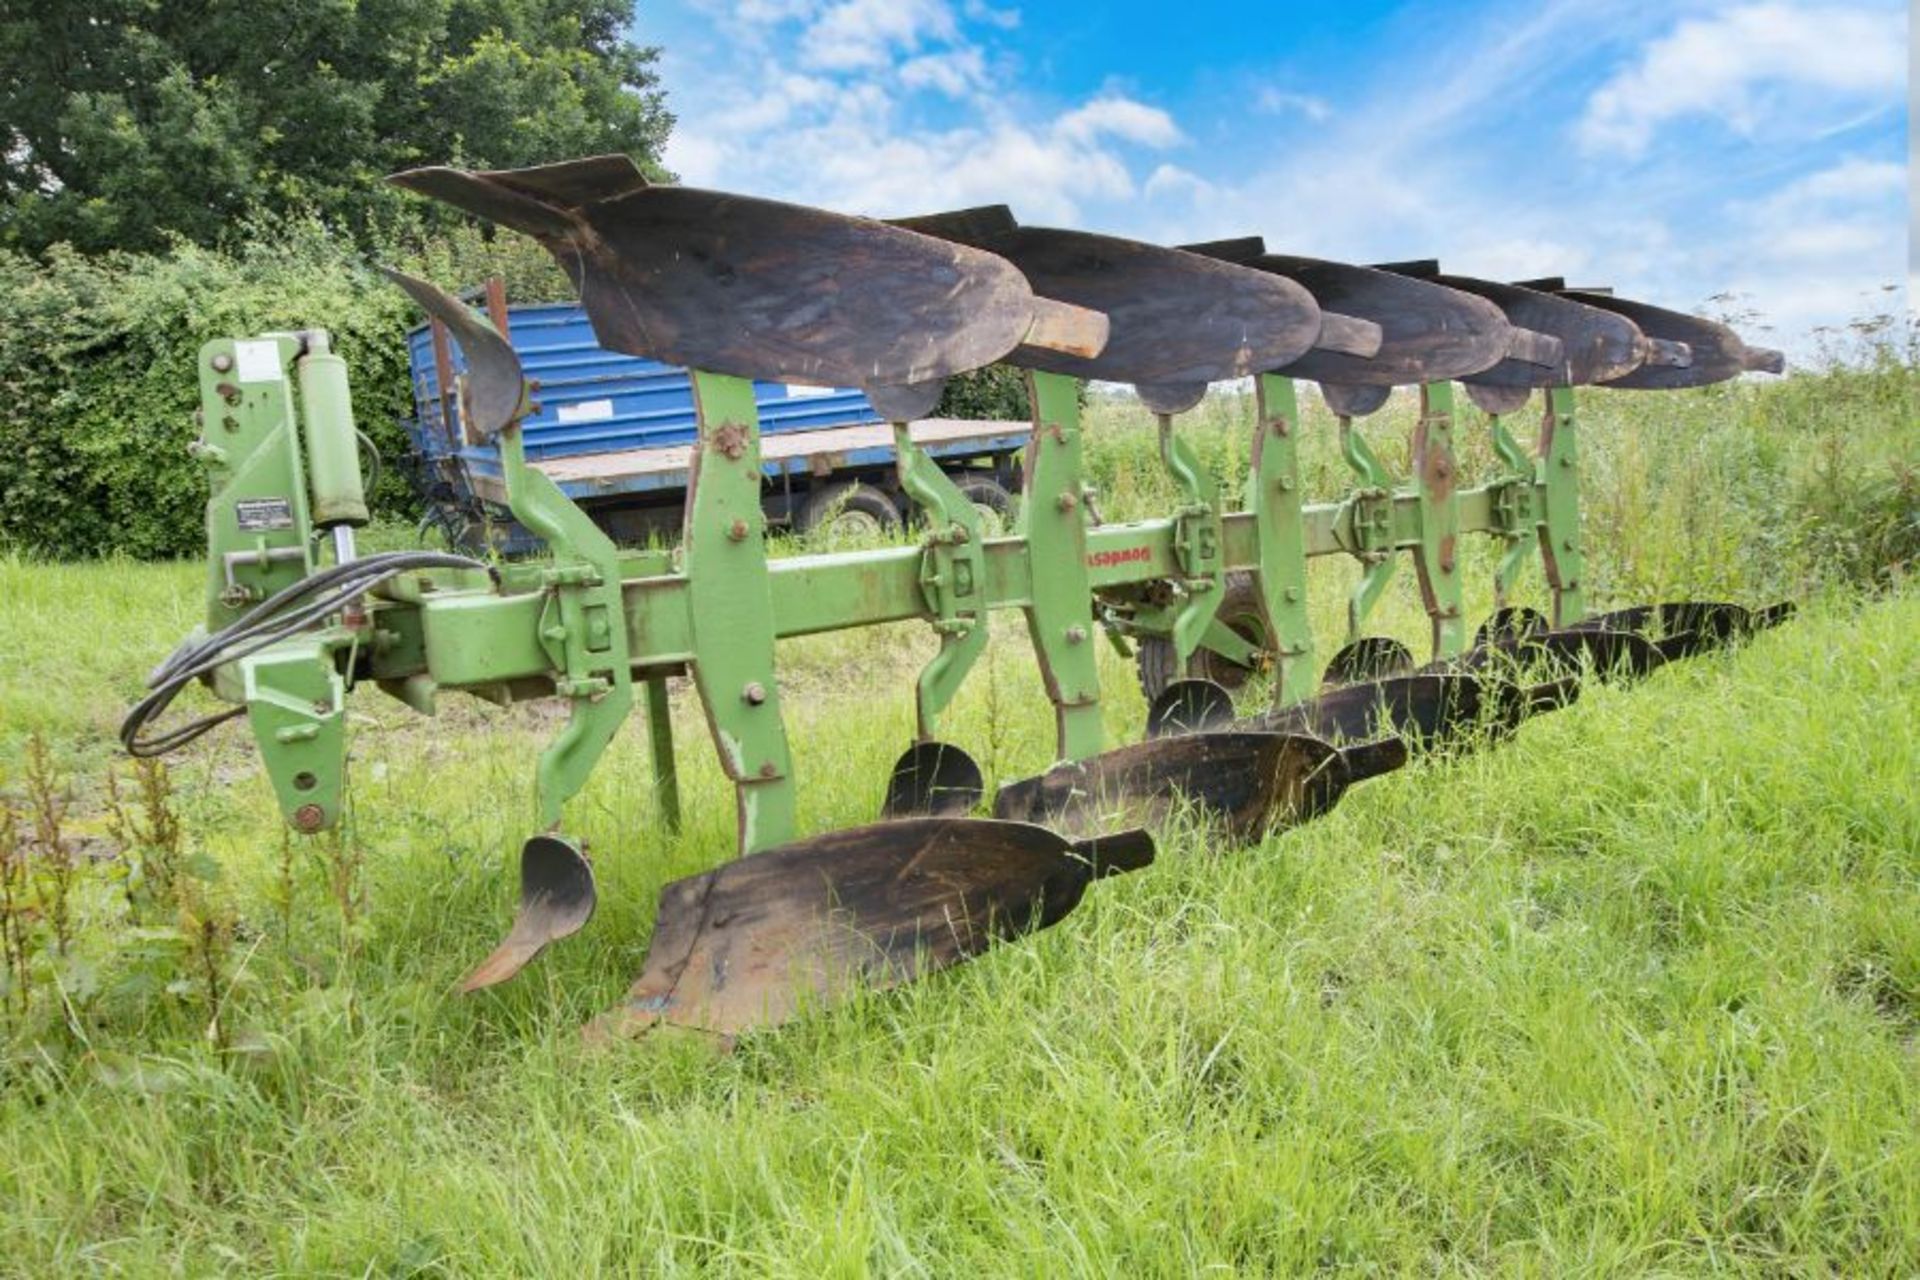 Dowdeswell DP7D2 4+1 reversible plough.